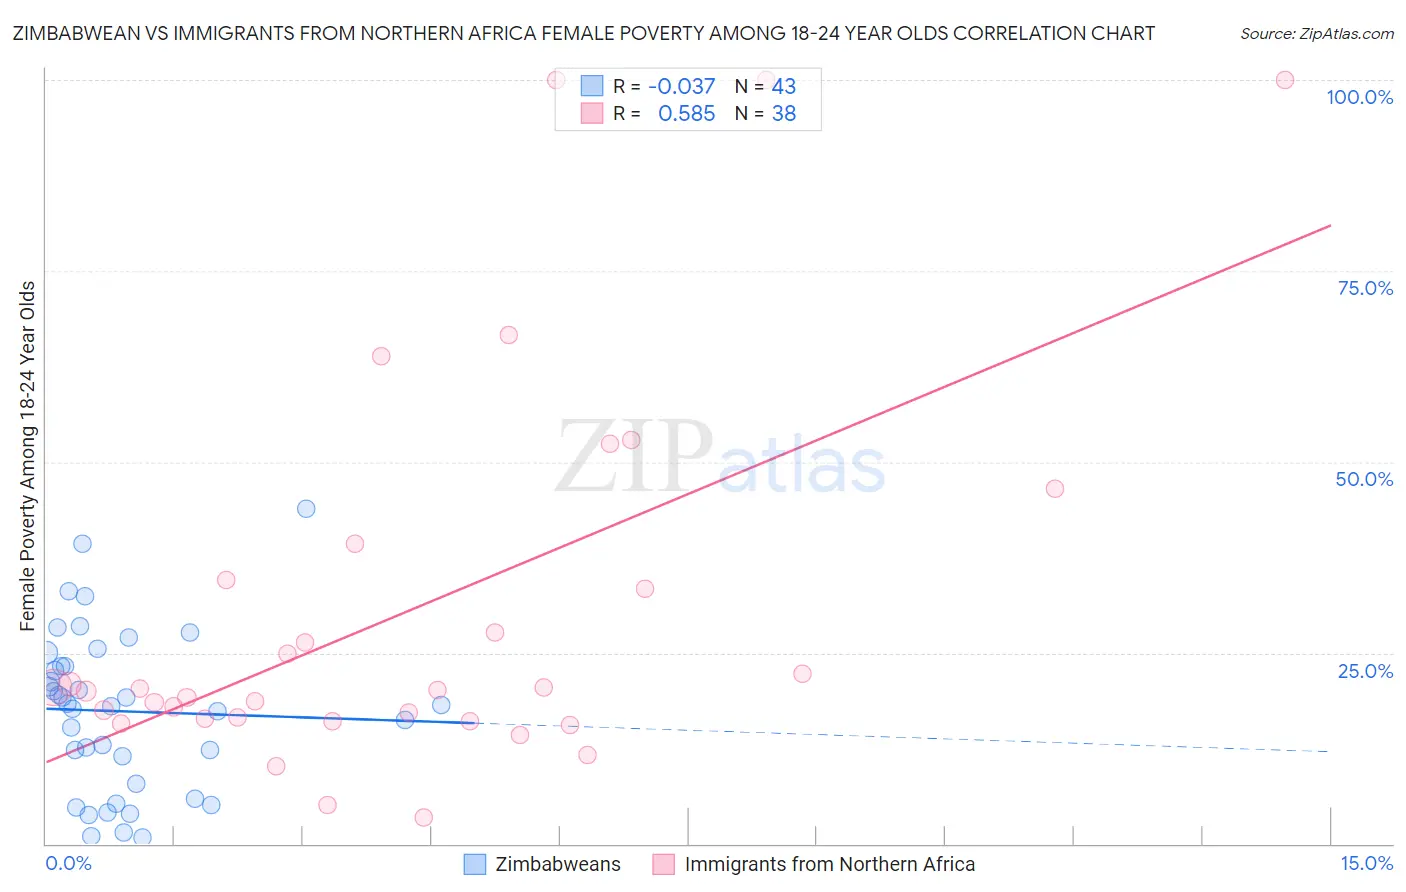 Zimbabwean vs Immigrants from Northern Africa Female Poverty Among 18-24 Year Olds